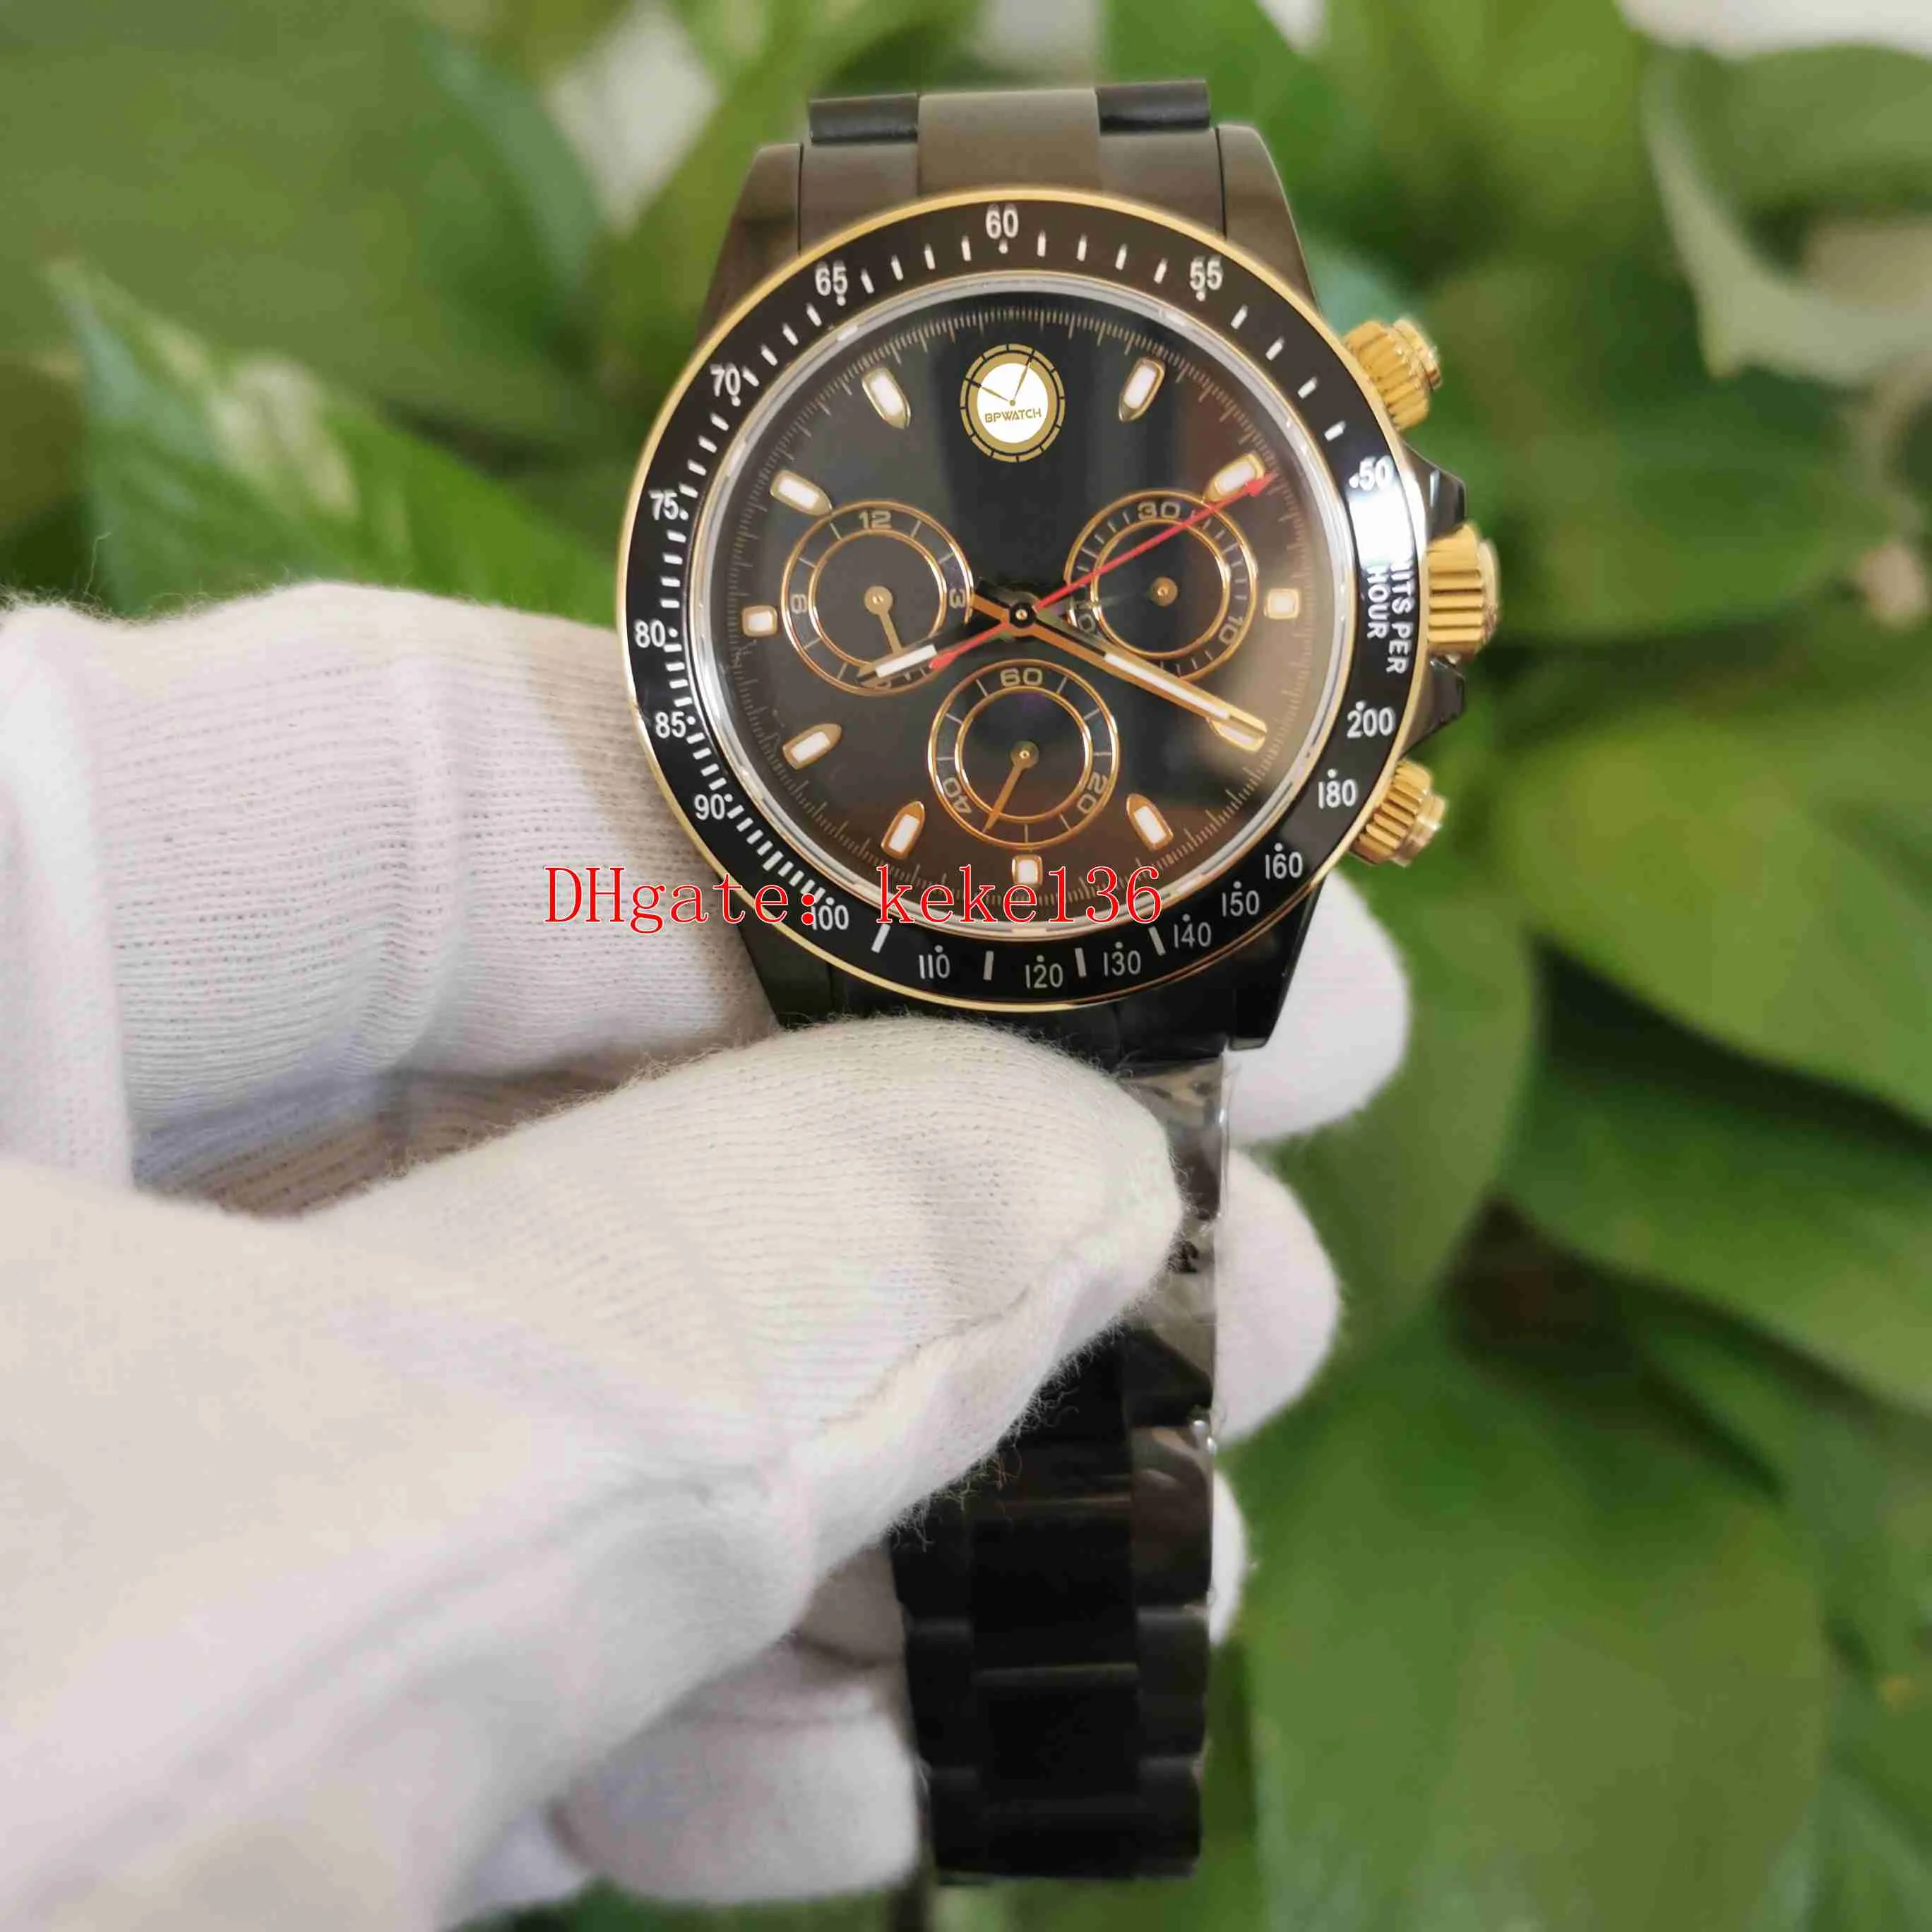 Super quality Mr Watches Perpetual 40mm Chronograph Working gold Black PVD Case CAL.4130 Movement Transparent Mechanical Automatic Mens Watch Men Wristwatches